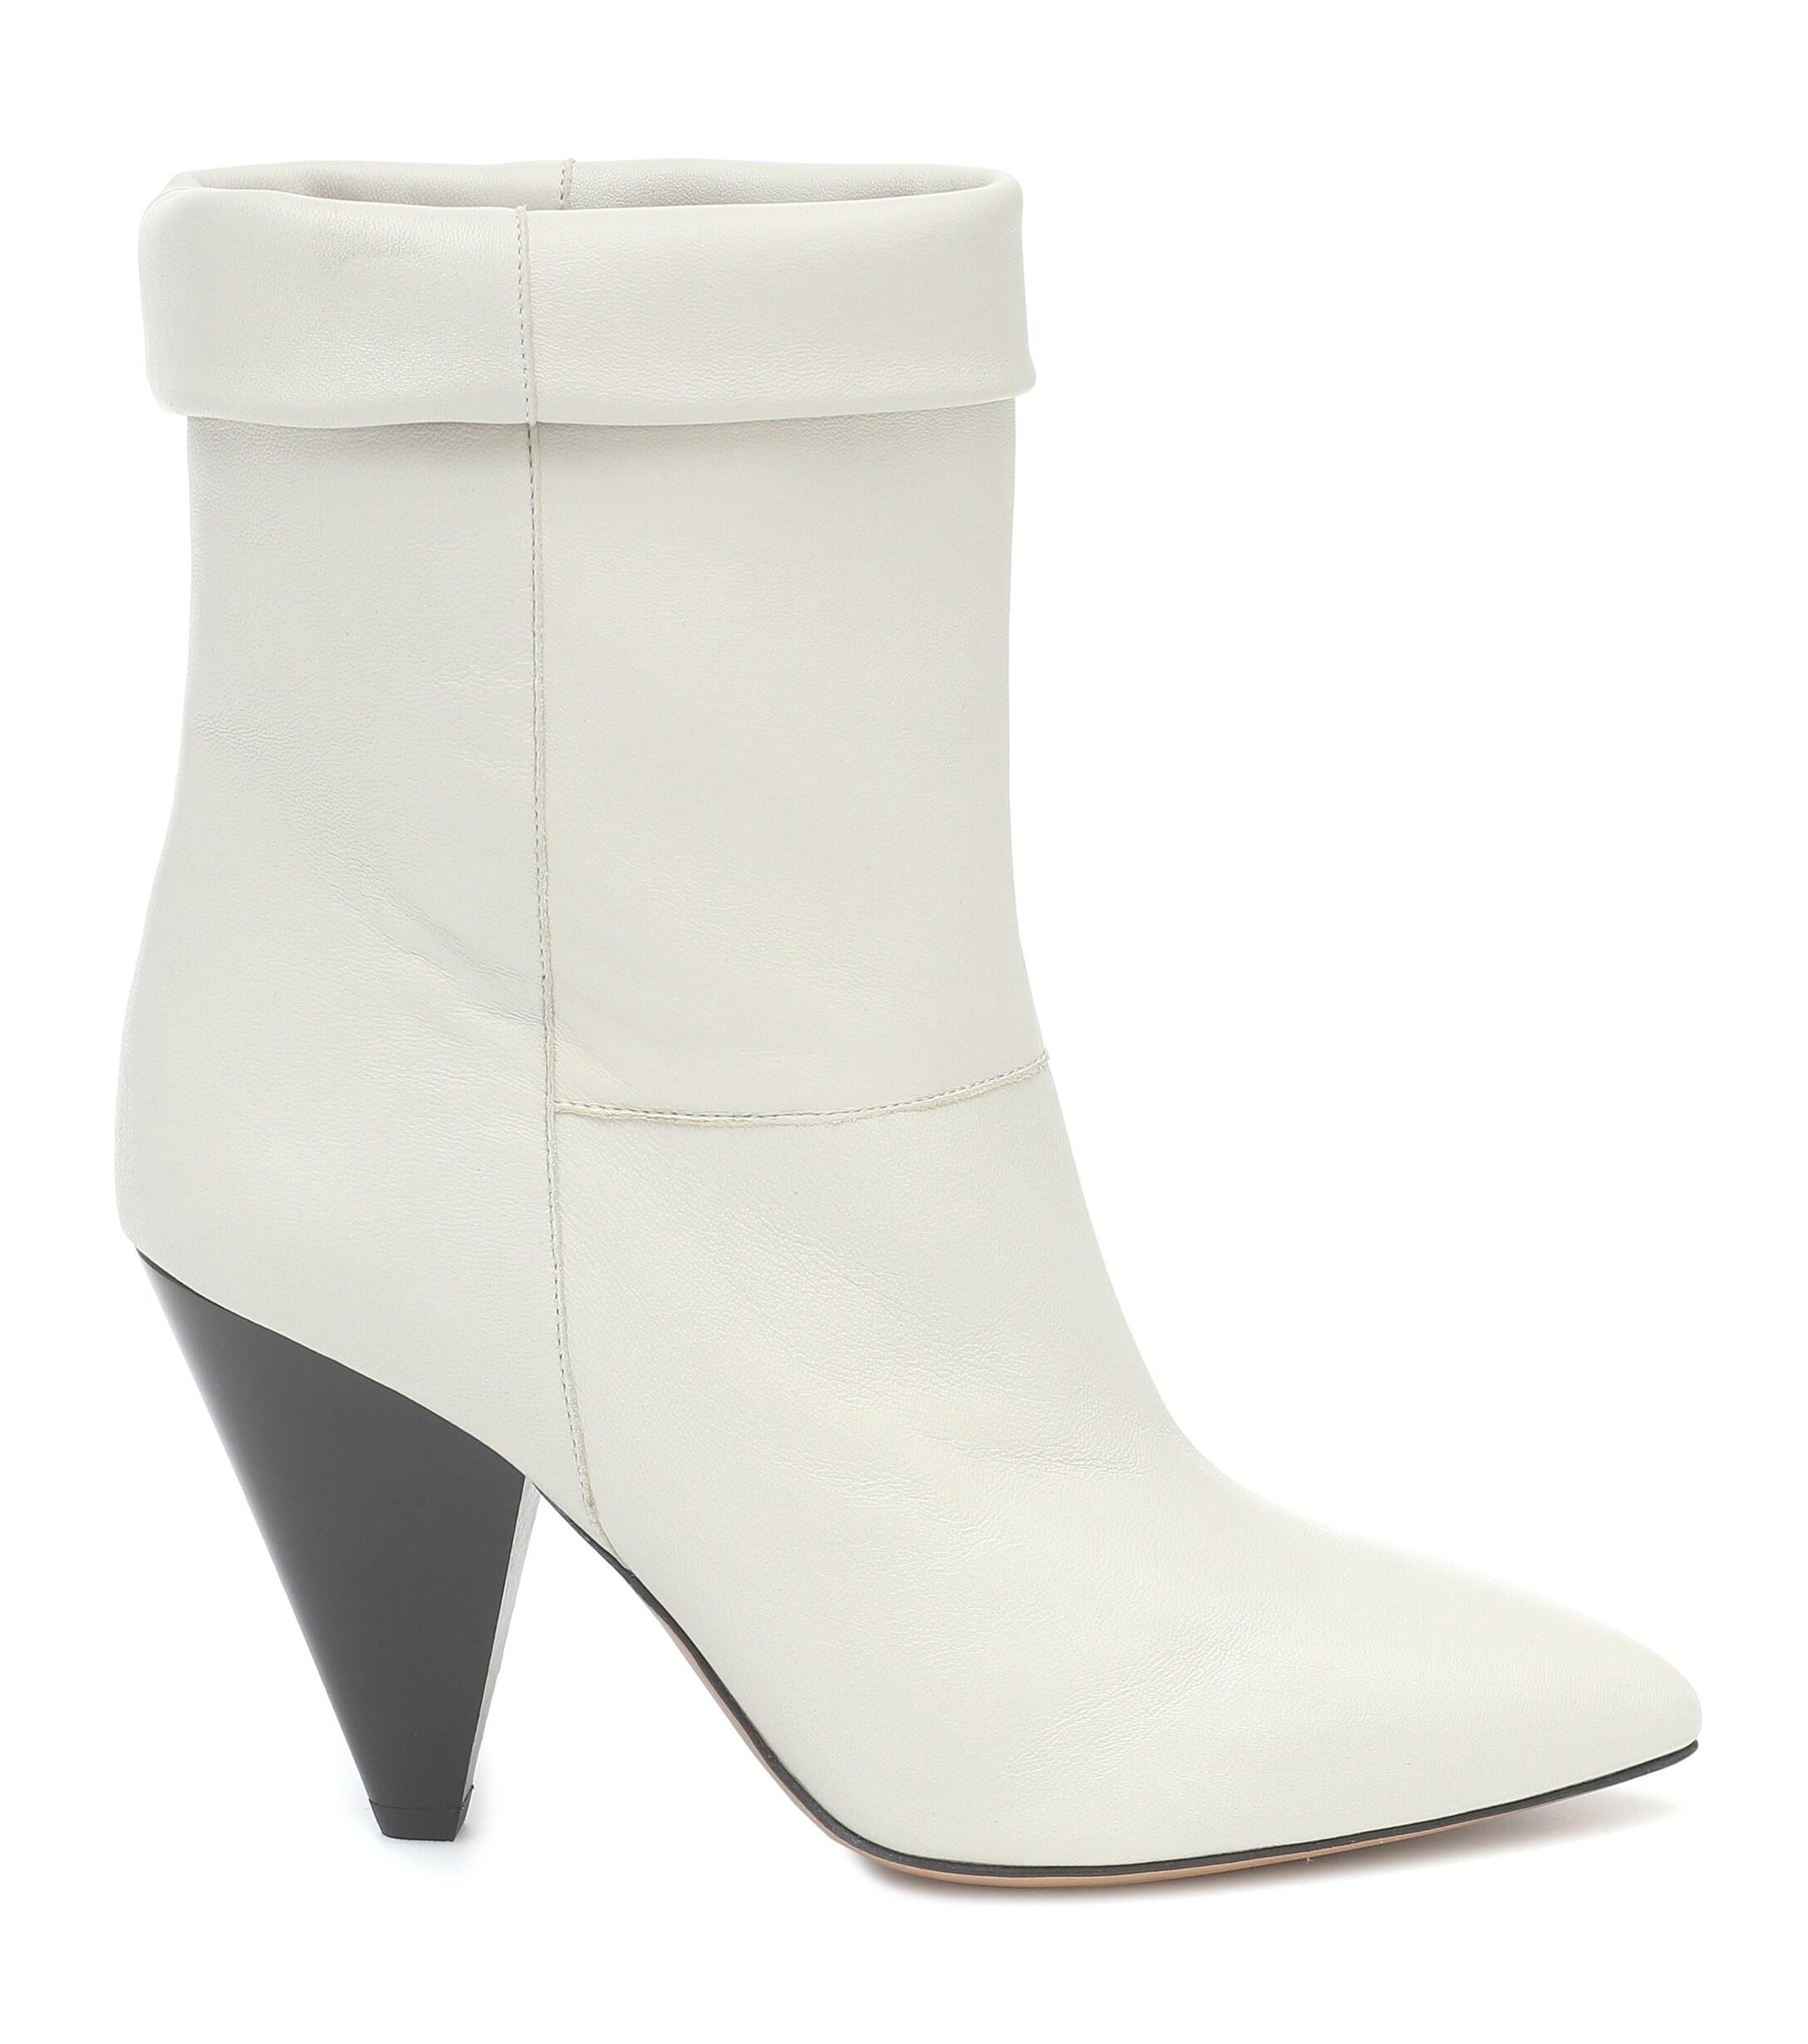 Isabel Marant Luido Leather Ankle Boots in White - Lyst